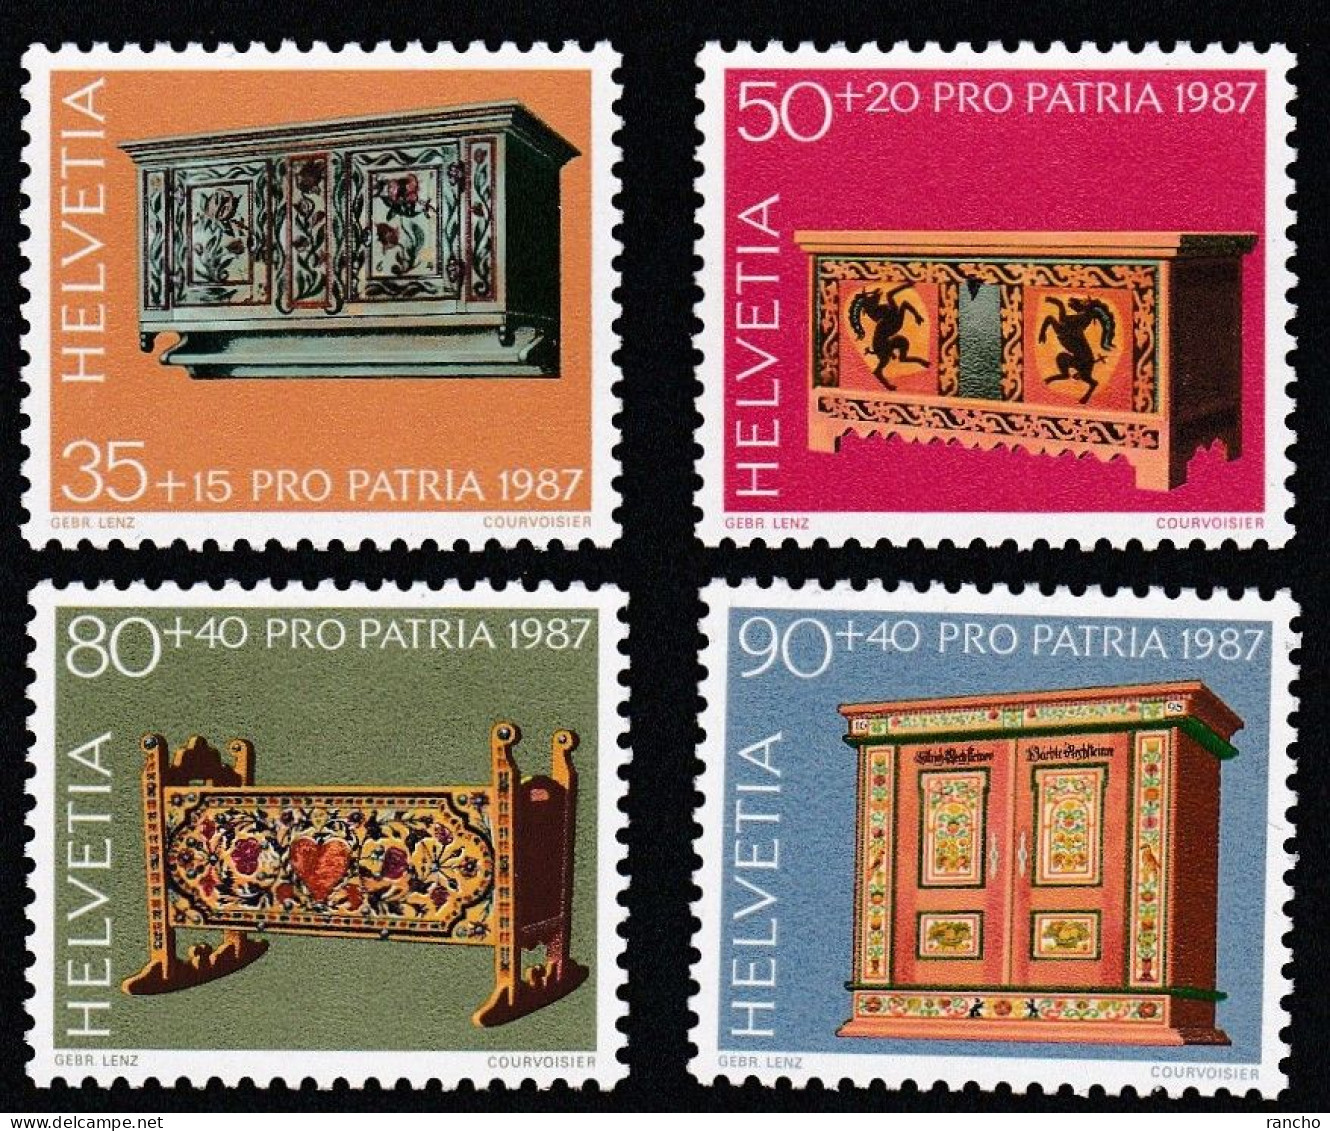 ** PRO/P. 1987. COLLECTION SERIE TIMBRES NEUFS A/GOMME C/.S.B.K. Nr:B215/18. Y&TELLIER Nr:1276/79. MICHEL Nr:1345/48.** - Ungebraucht